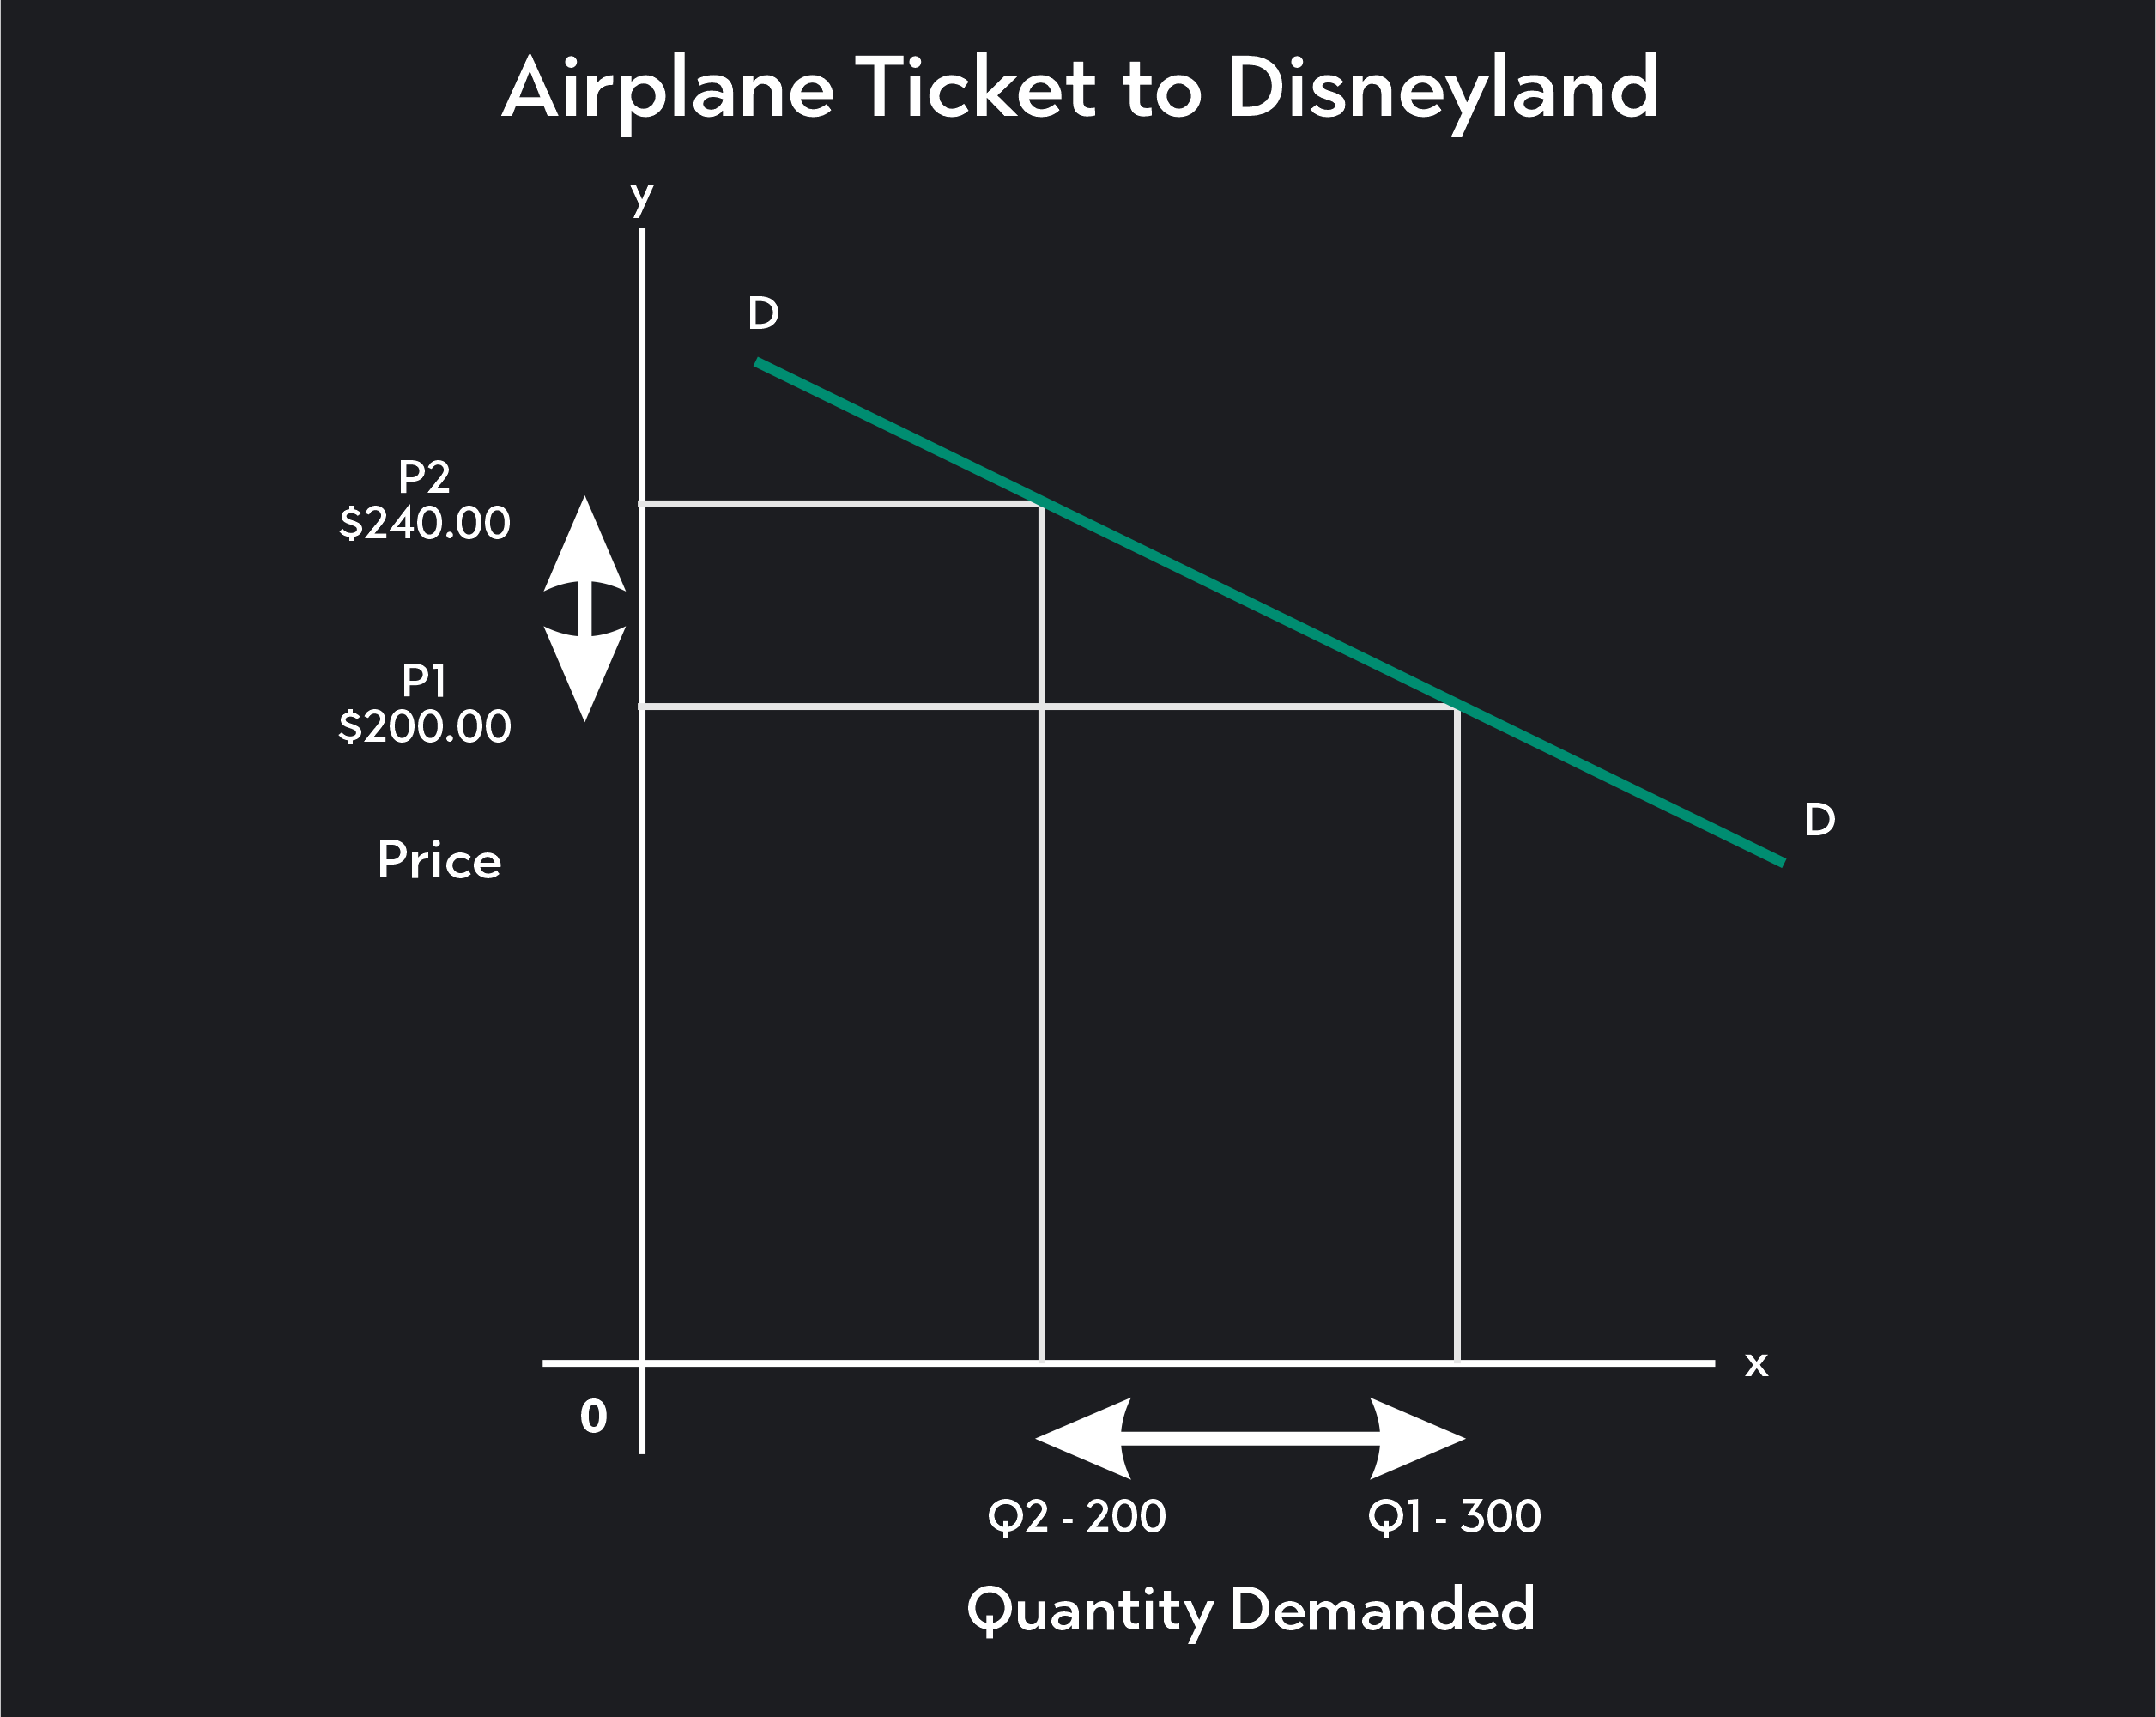 The graph below shows the demand curve for an airline ticket to Disneyland in Orlando, FL, from New York City. 